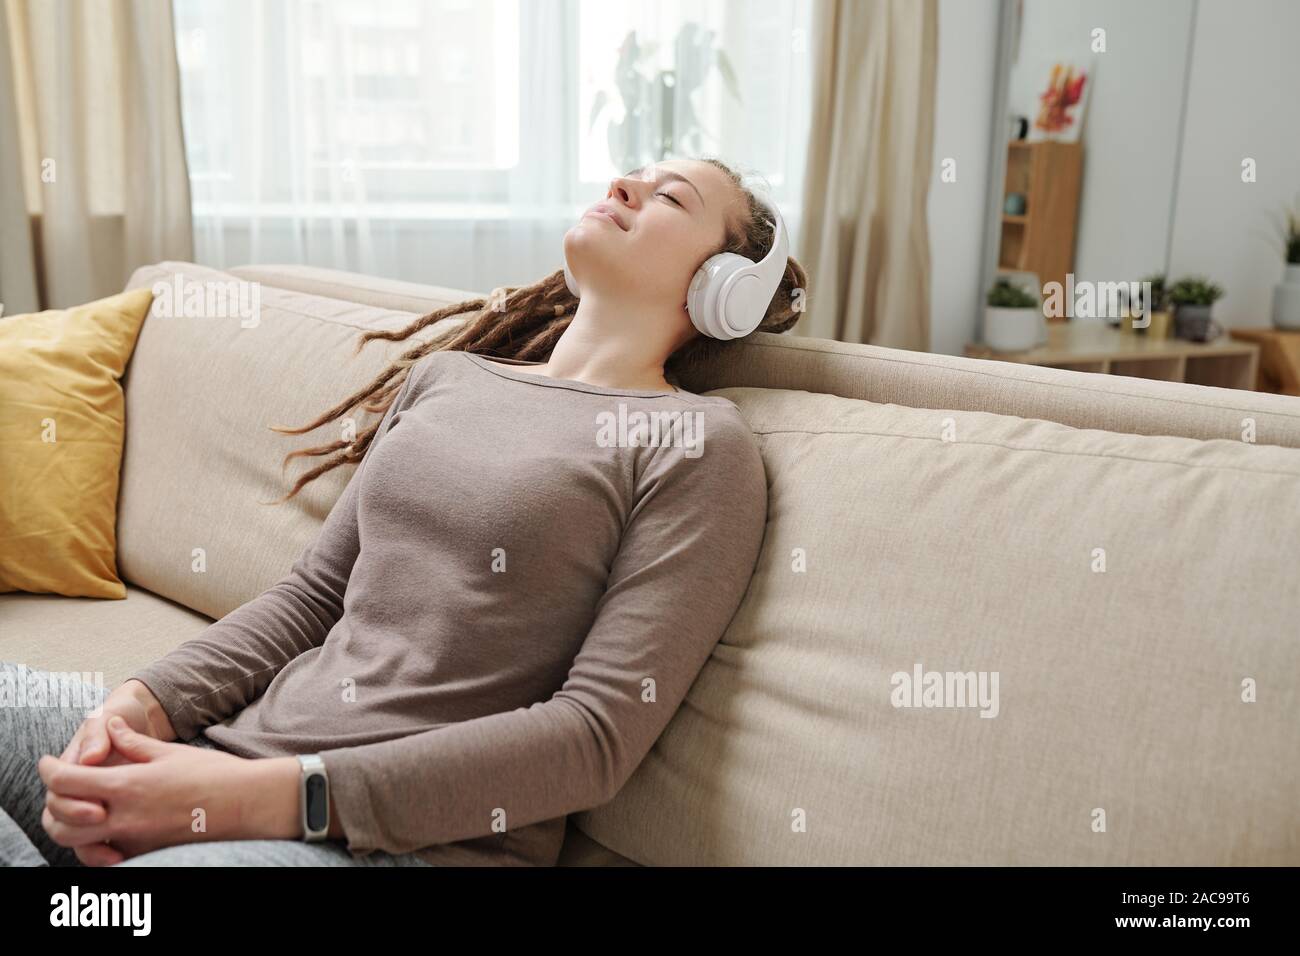 Happy young relaxed woman with headphones listening to meditation music Stock Photo